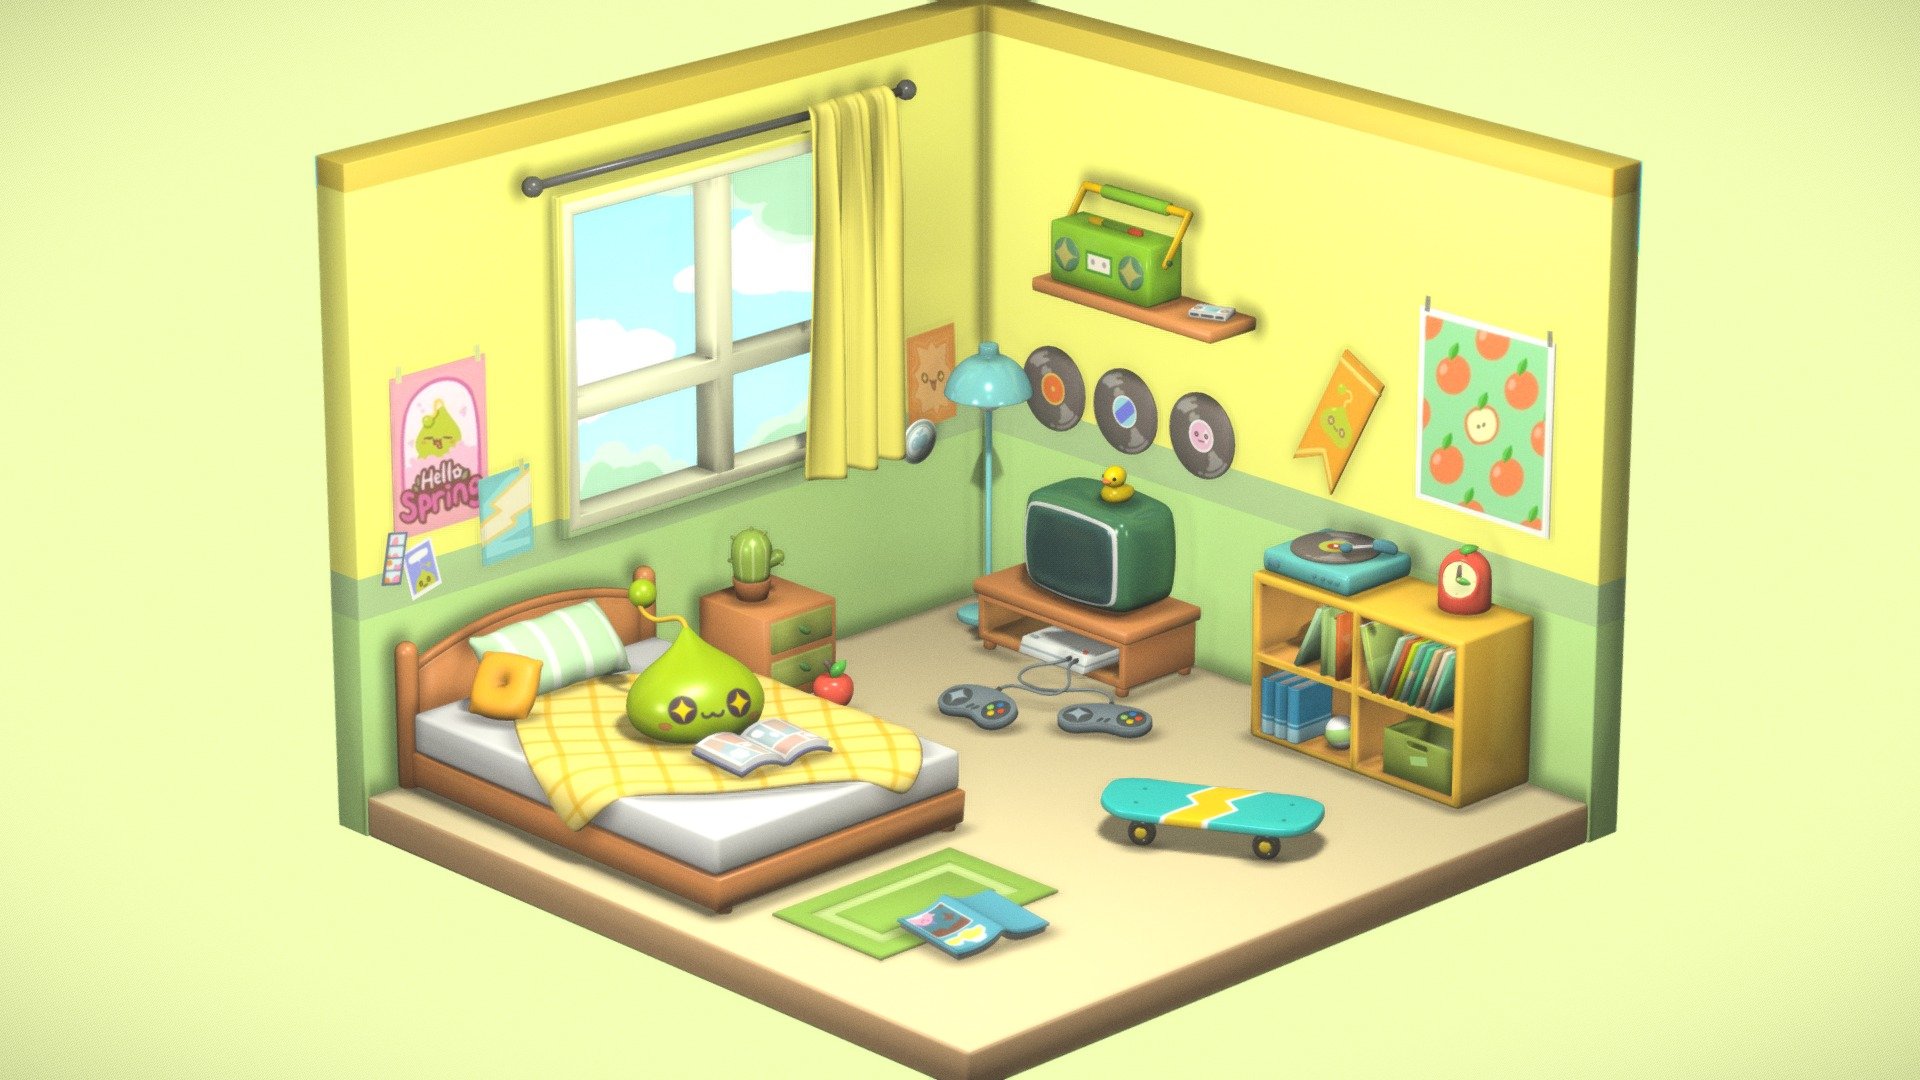 Slime's bedroom from game Maplestory.

Original art by @pink_pinkbean.

 - Slime's Bedroom - 3D model by passerby3d 3d model